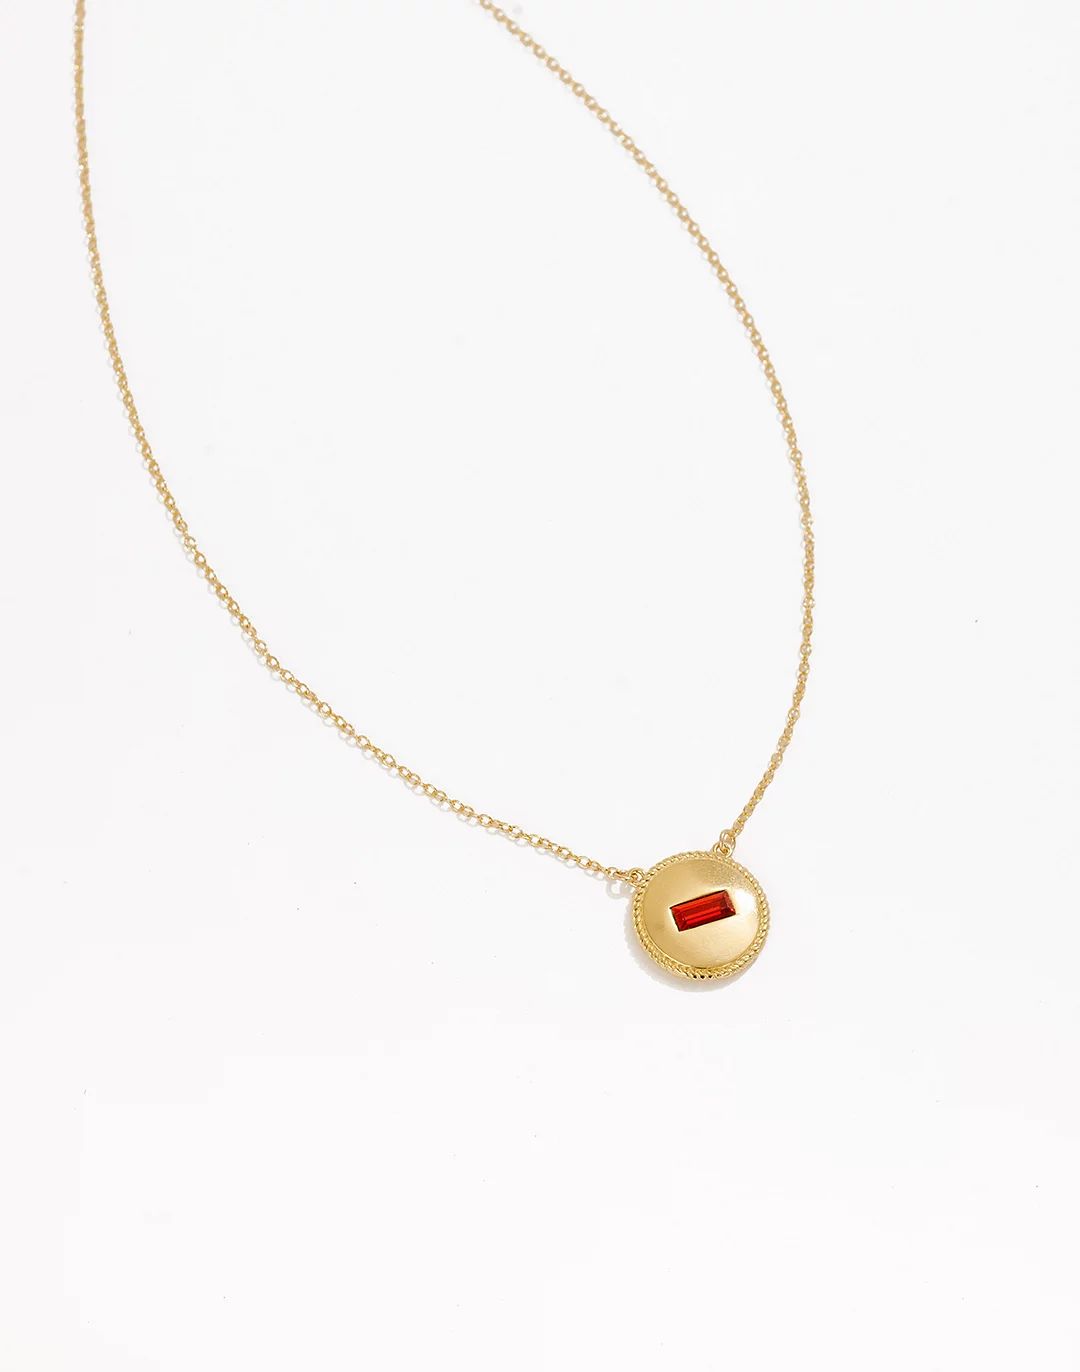 Madewell x Katie Dean Jewelry™ Coin Birthstone Necklace | Madewell